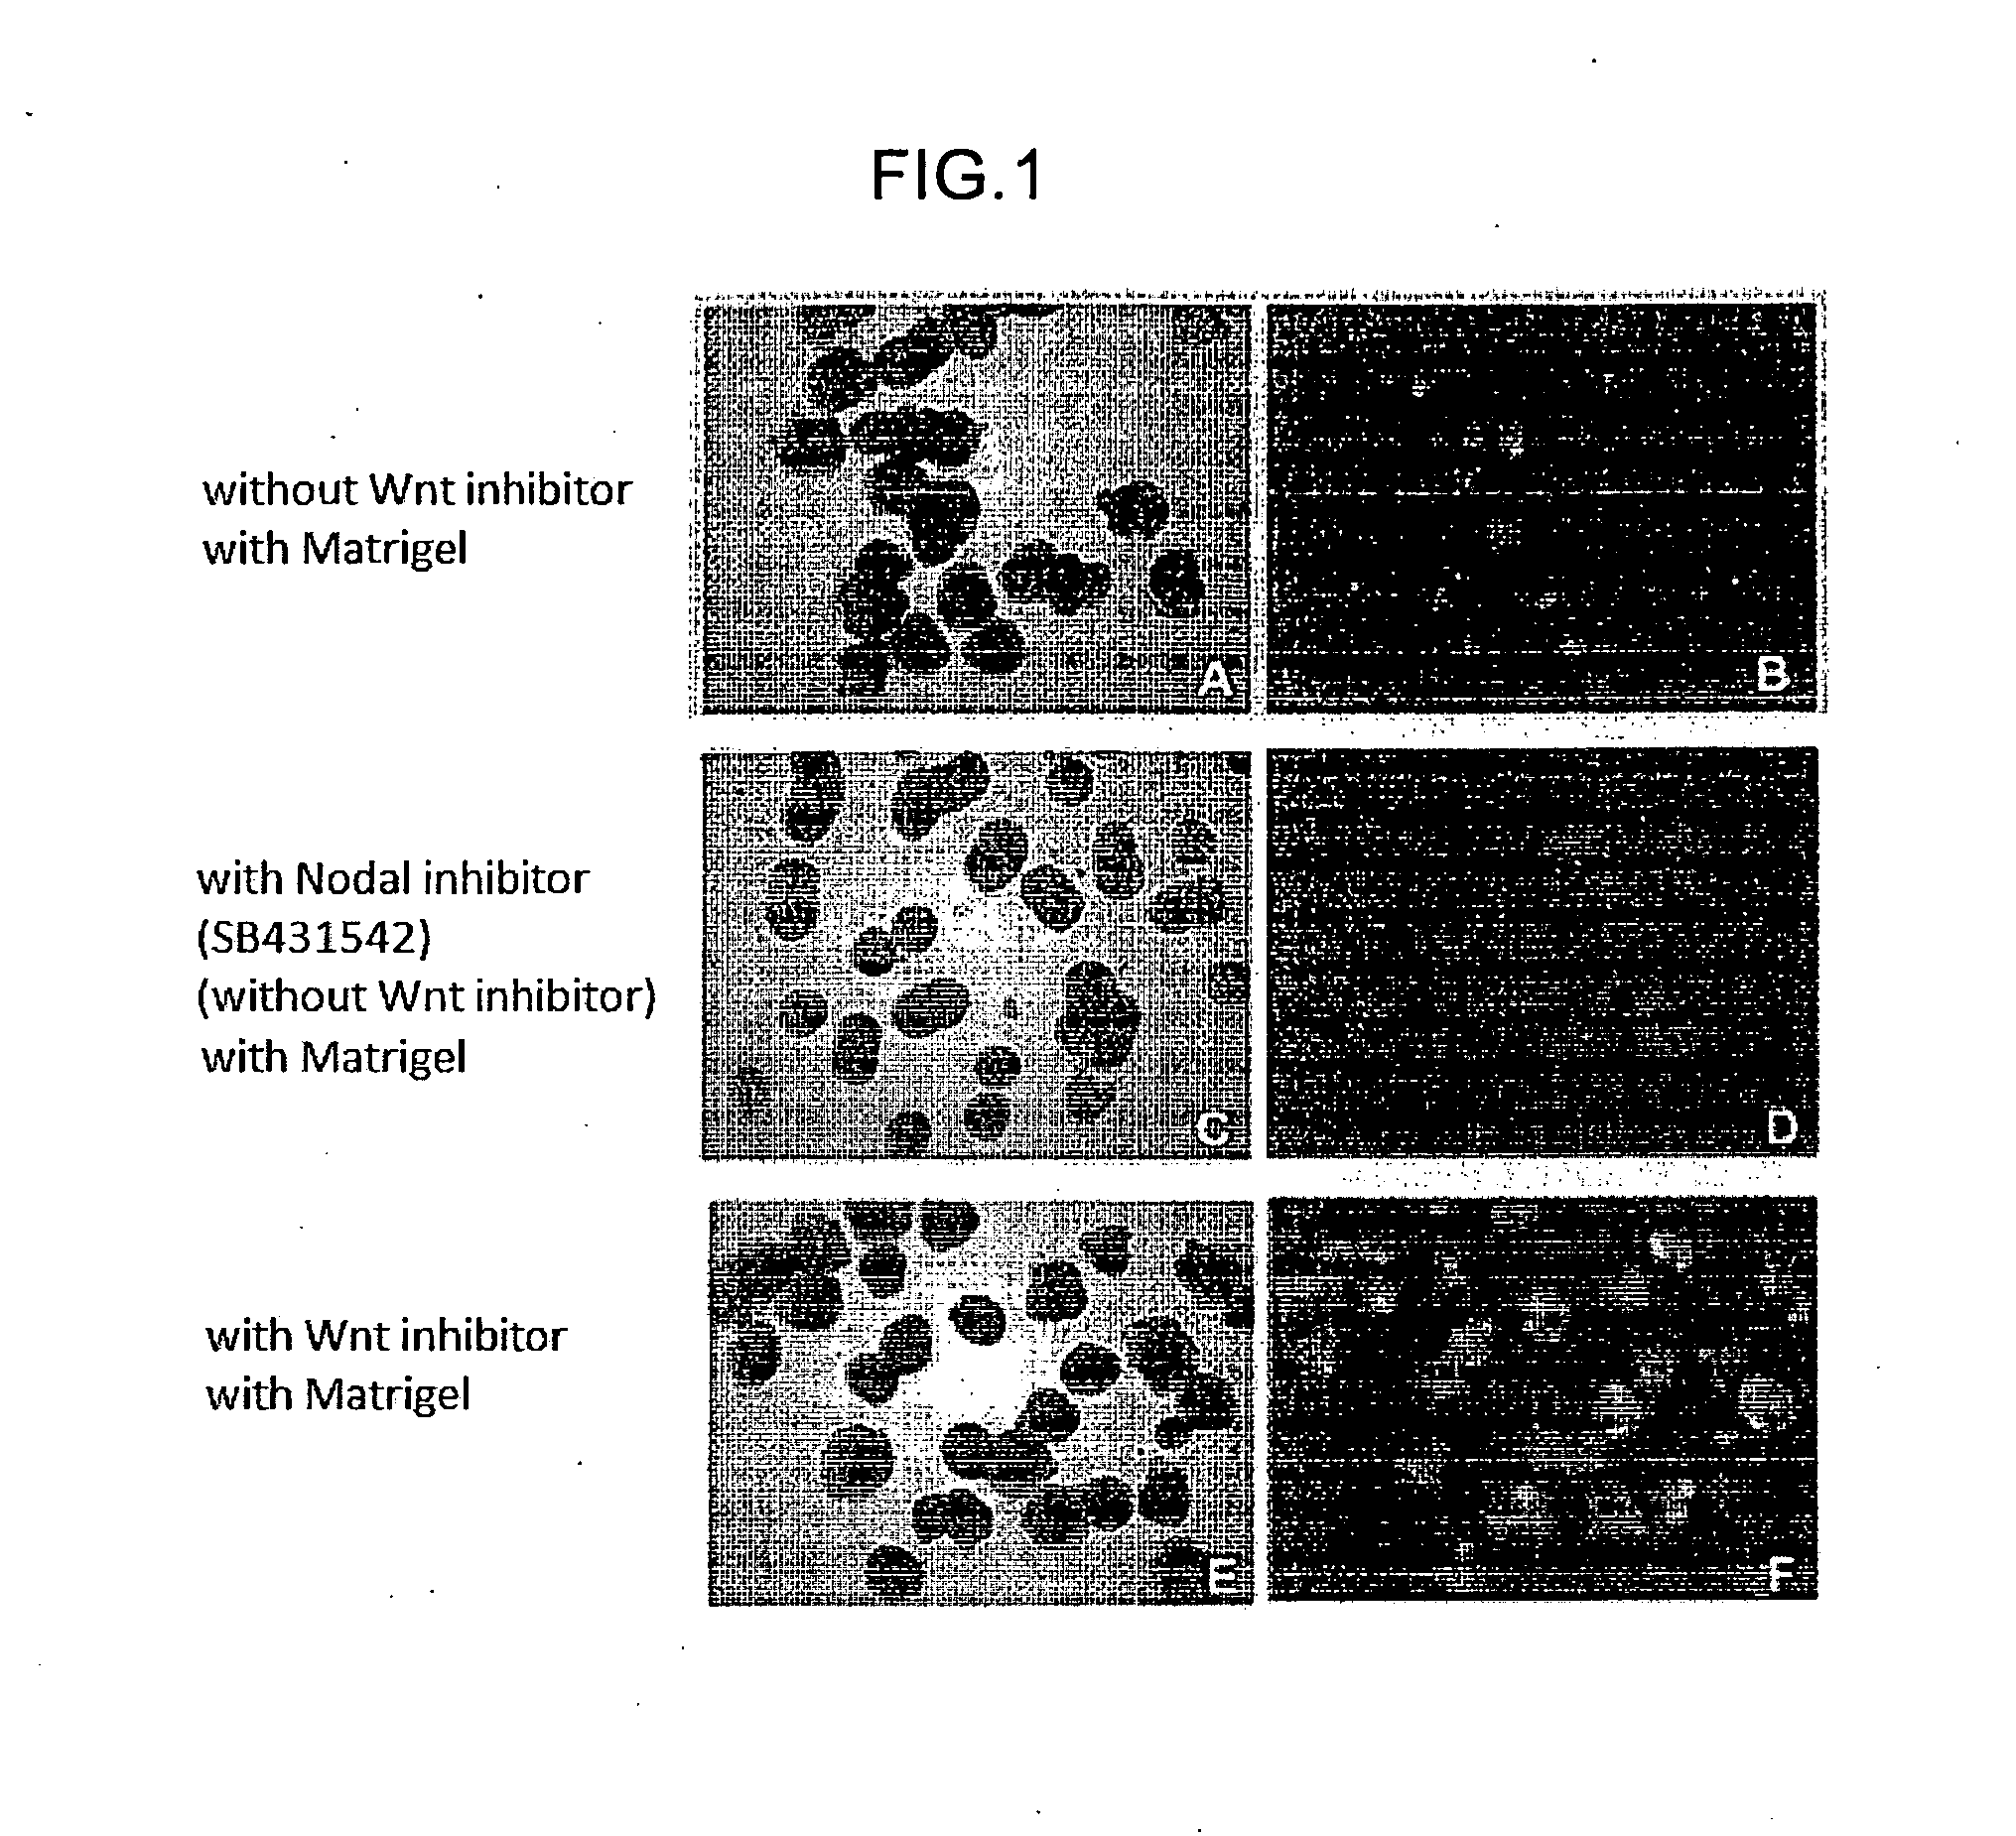 Methods for producing retinal tissue and retina-related cell